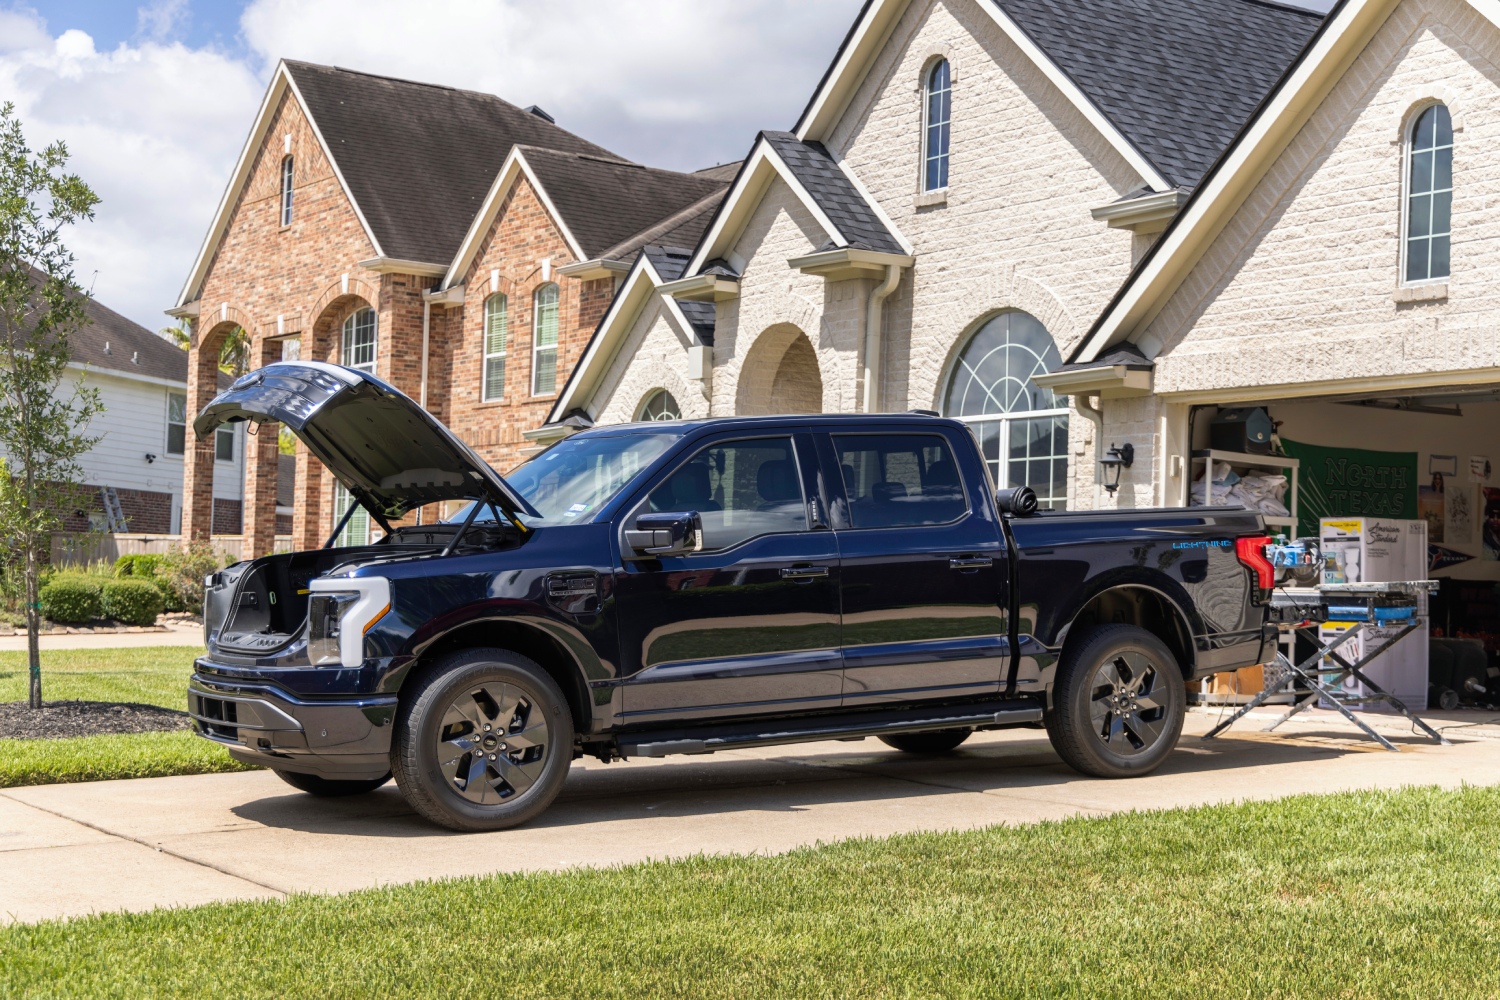 Buying an electric vehicle like this Ford F-150 Lightning electric truck requires charging